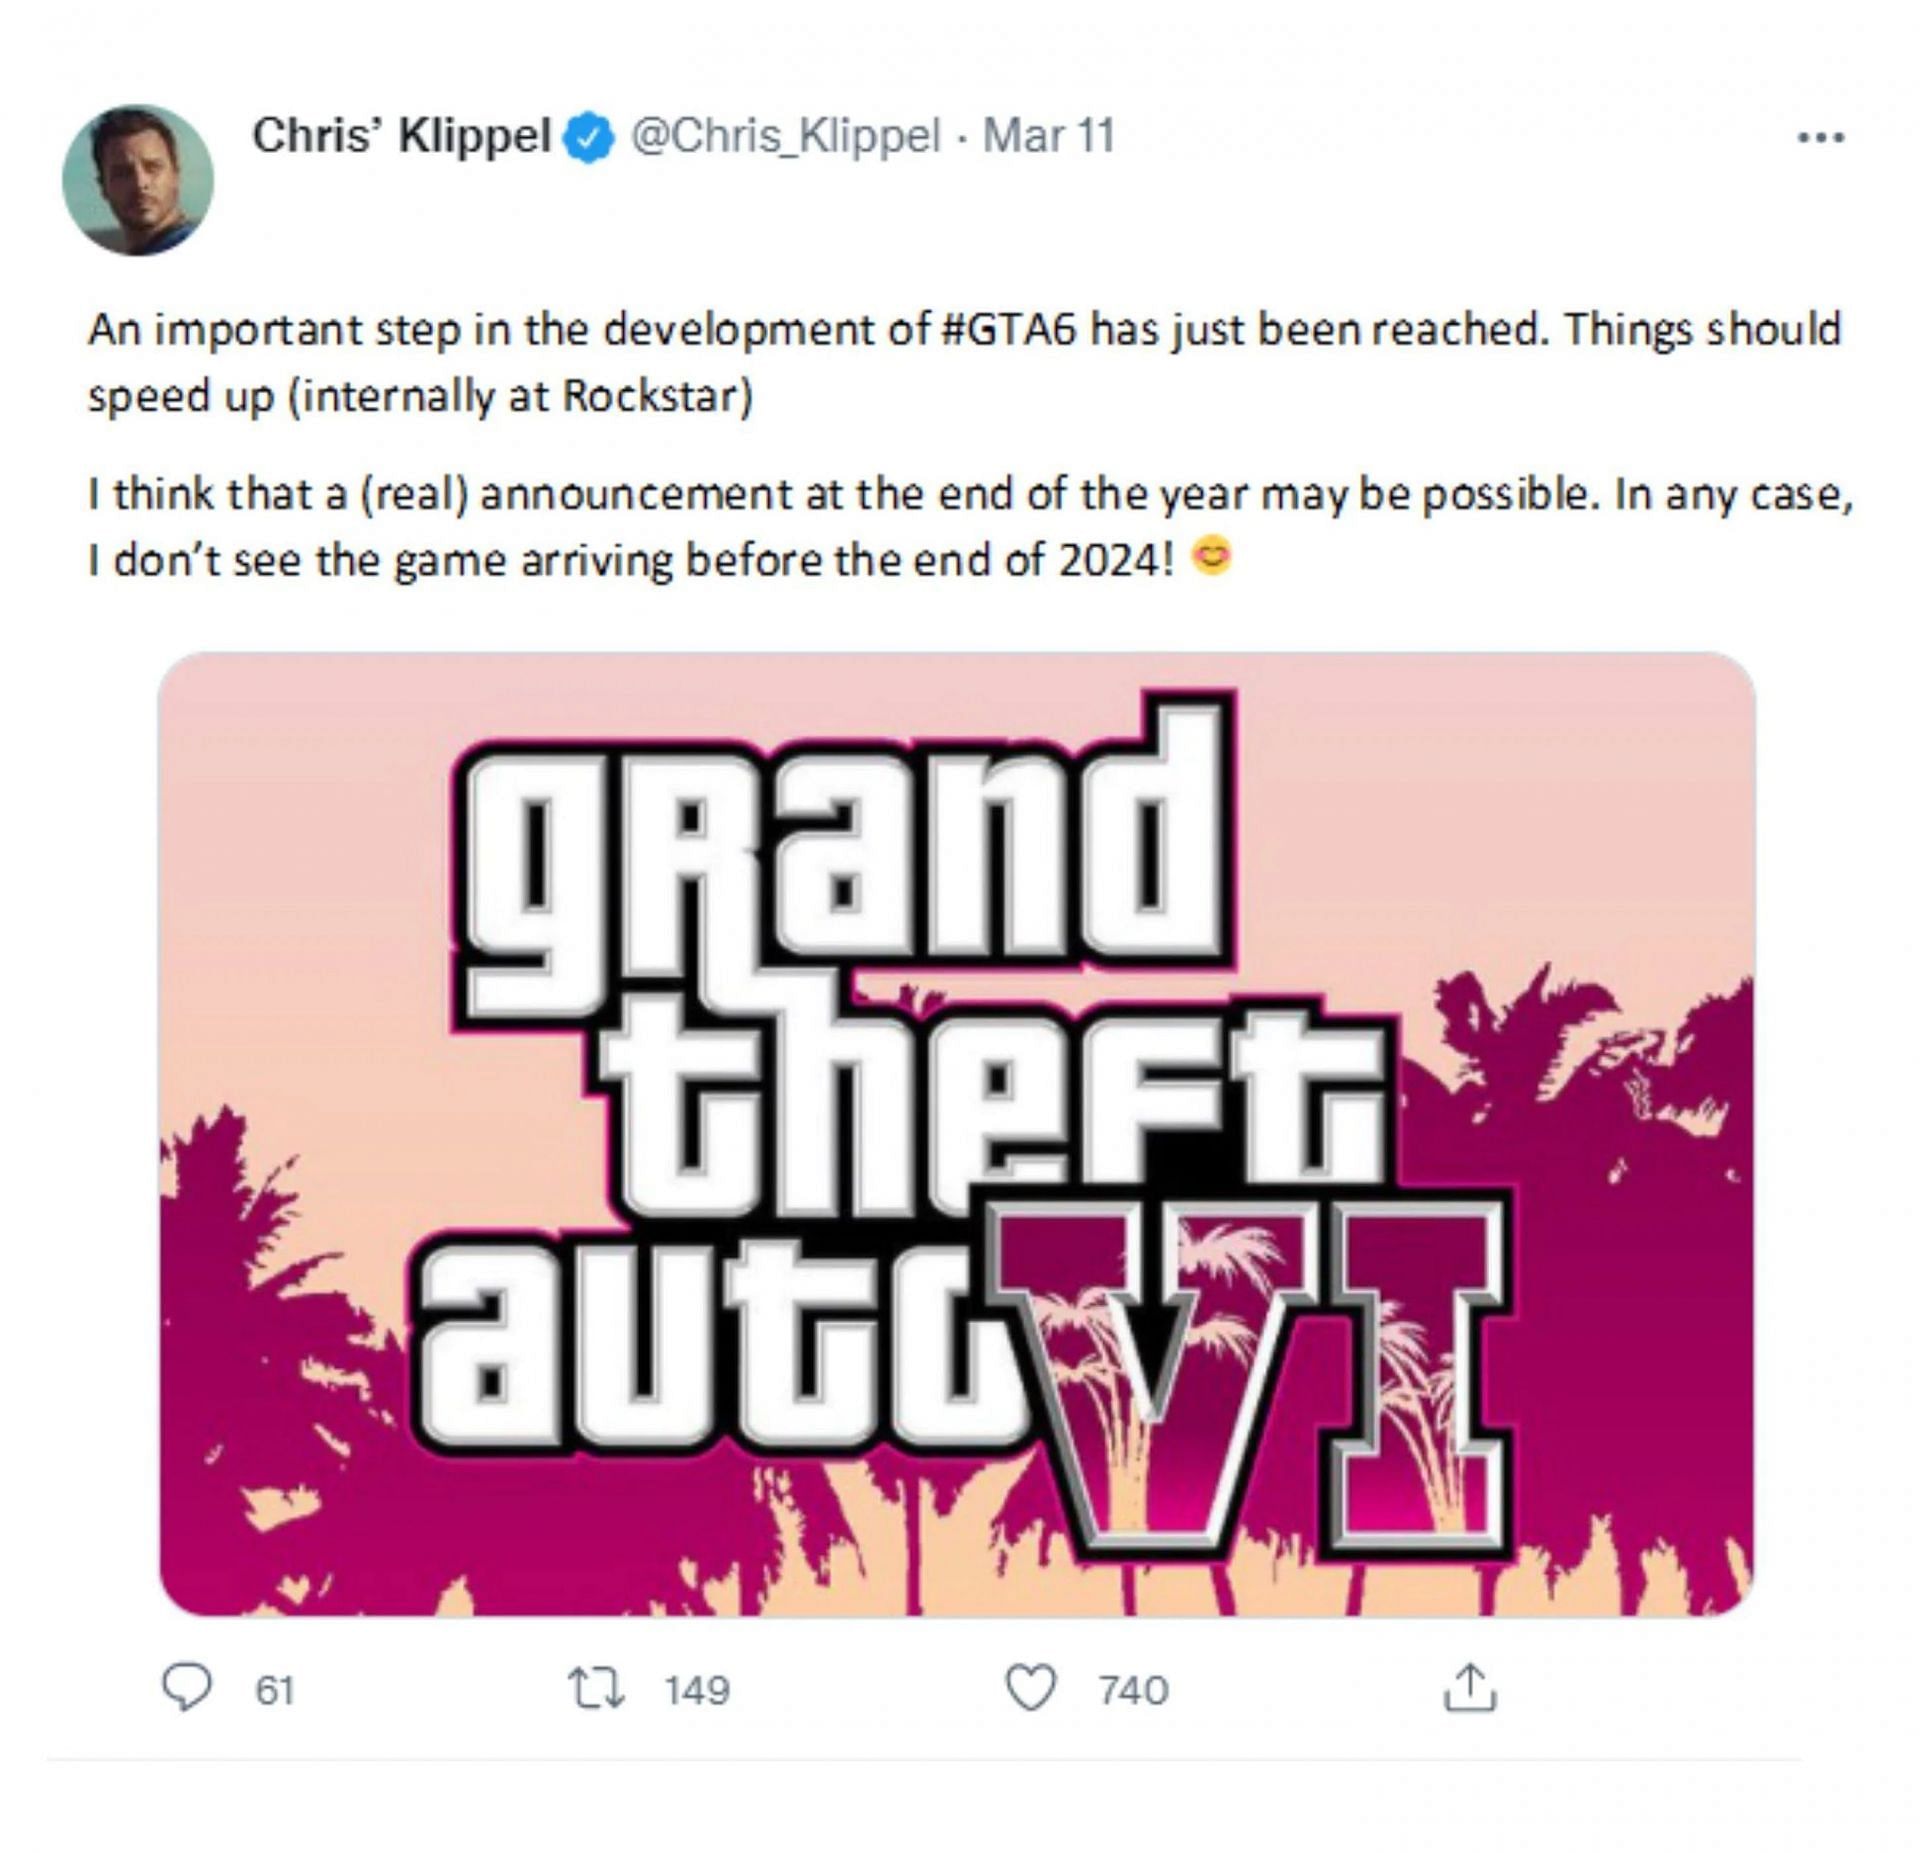 The original post was translate from French to English by @GTA_Fanatic88 (Image via Sportskeeda)